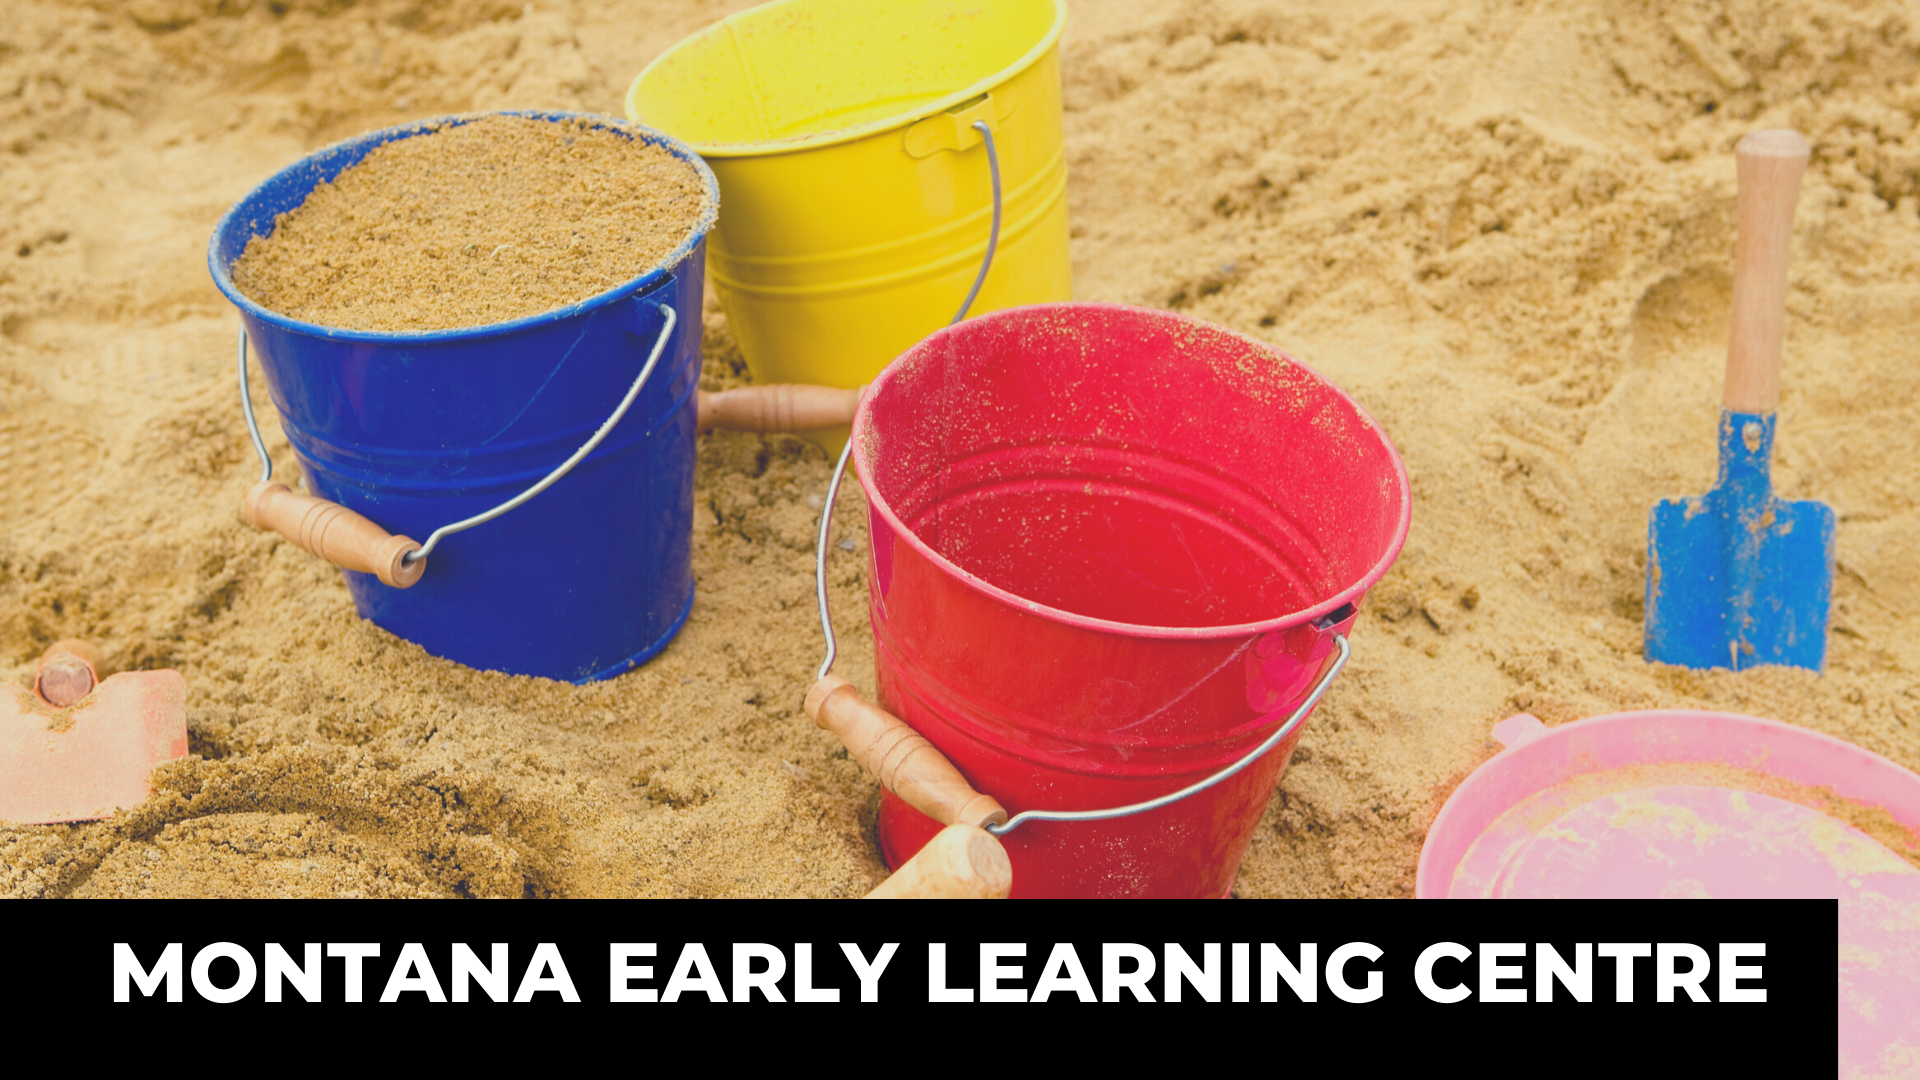 Montana Early Learning Centre